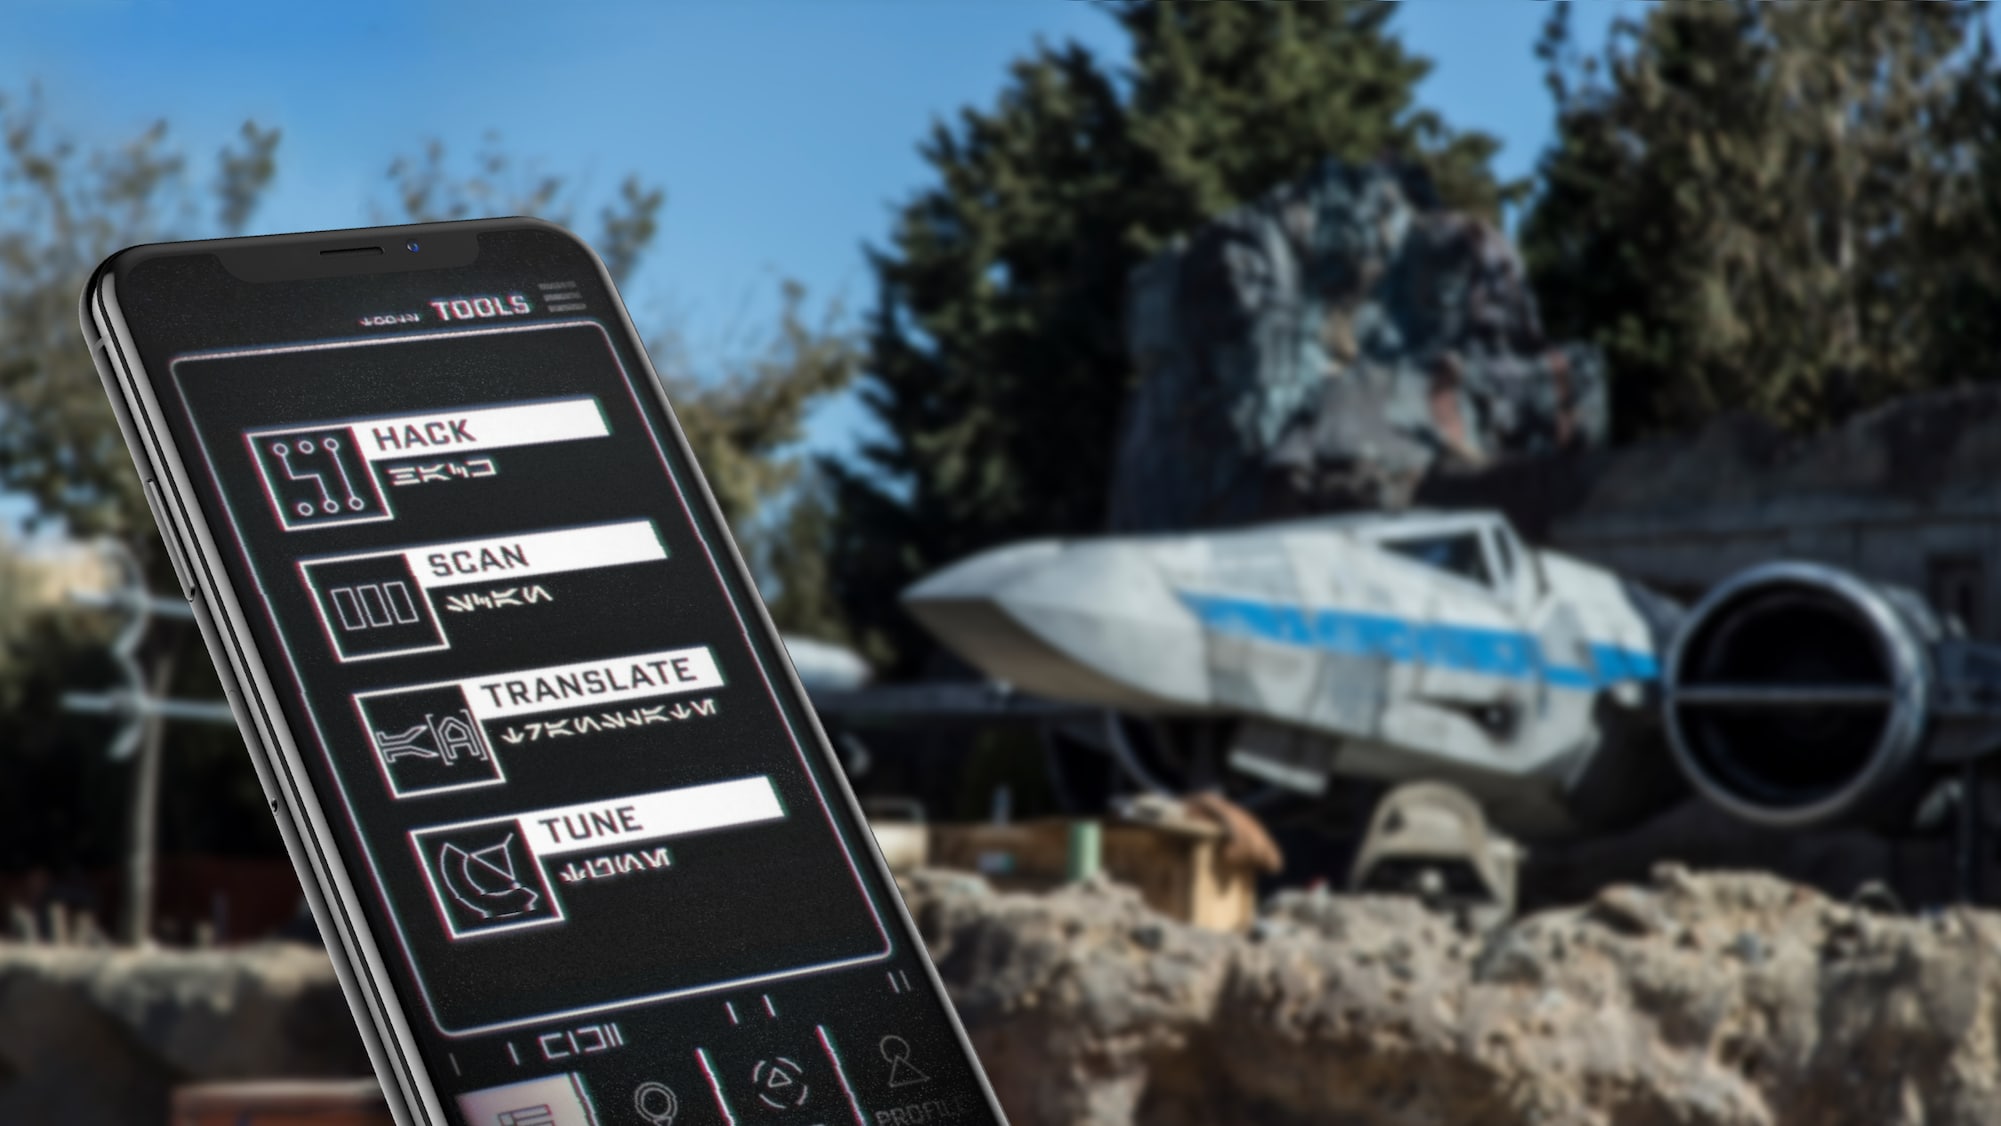 New Star Wars: Galaxy’s Edge Features on Play Disney Parks App